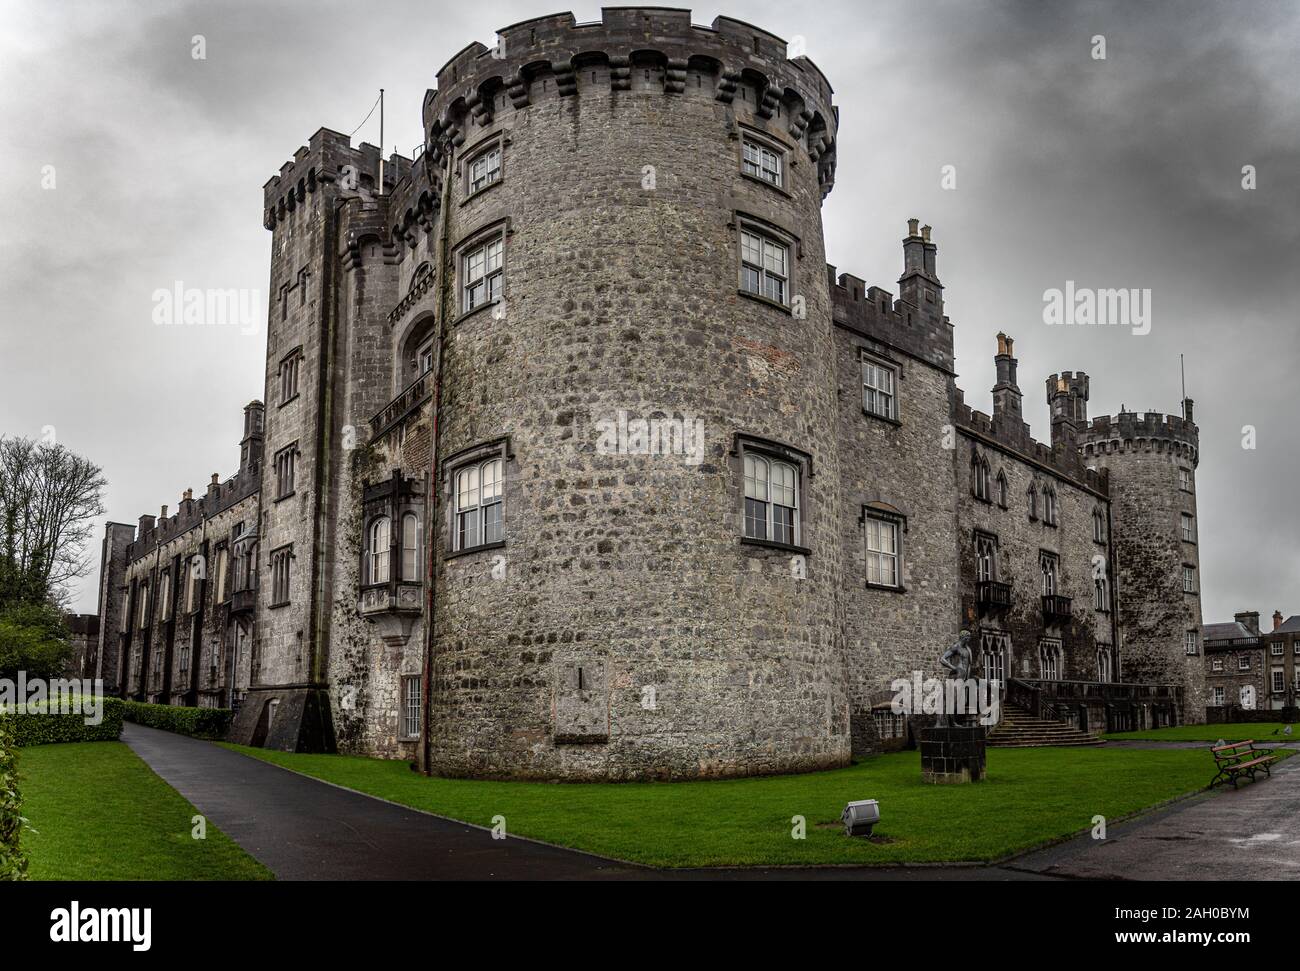 KILKENNY, IRELAND, DECEMBER 23, 2018: Kilkenny Castle seen from the corner of its entrance on a dramatic cloudy day. Stock Photo